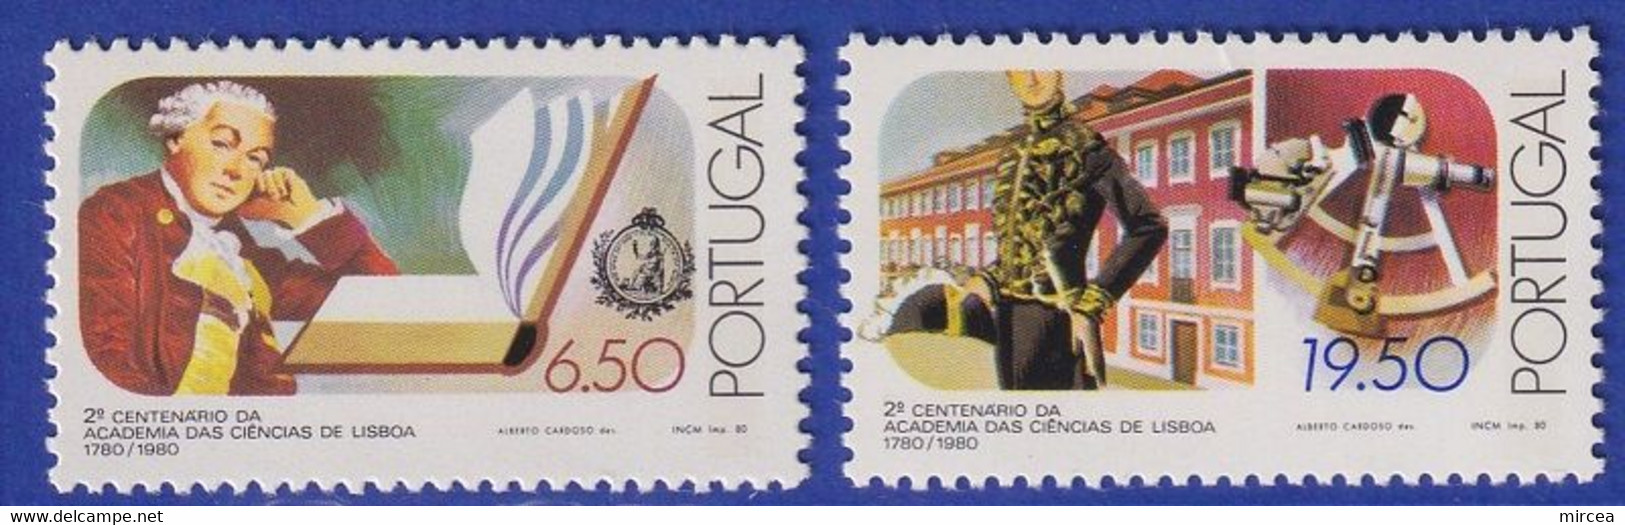 C3141 - Portugal 1980 - 34 timbres neufs**